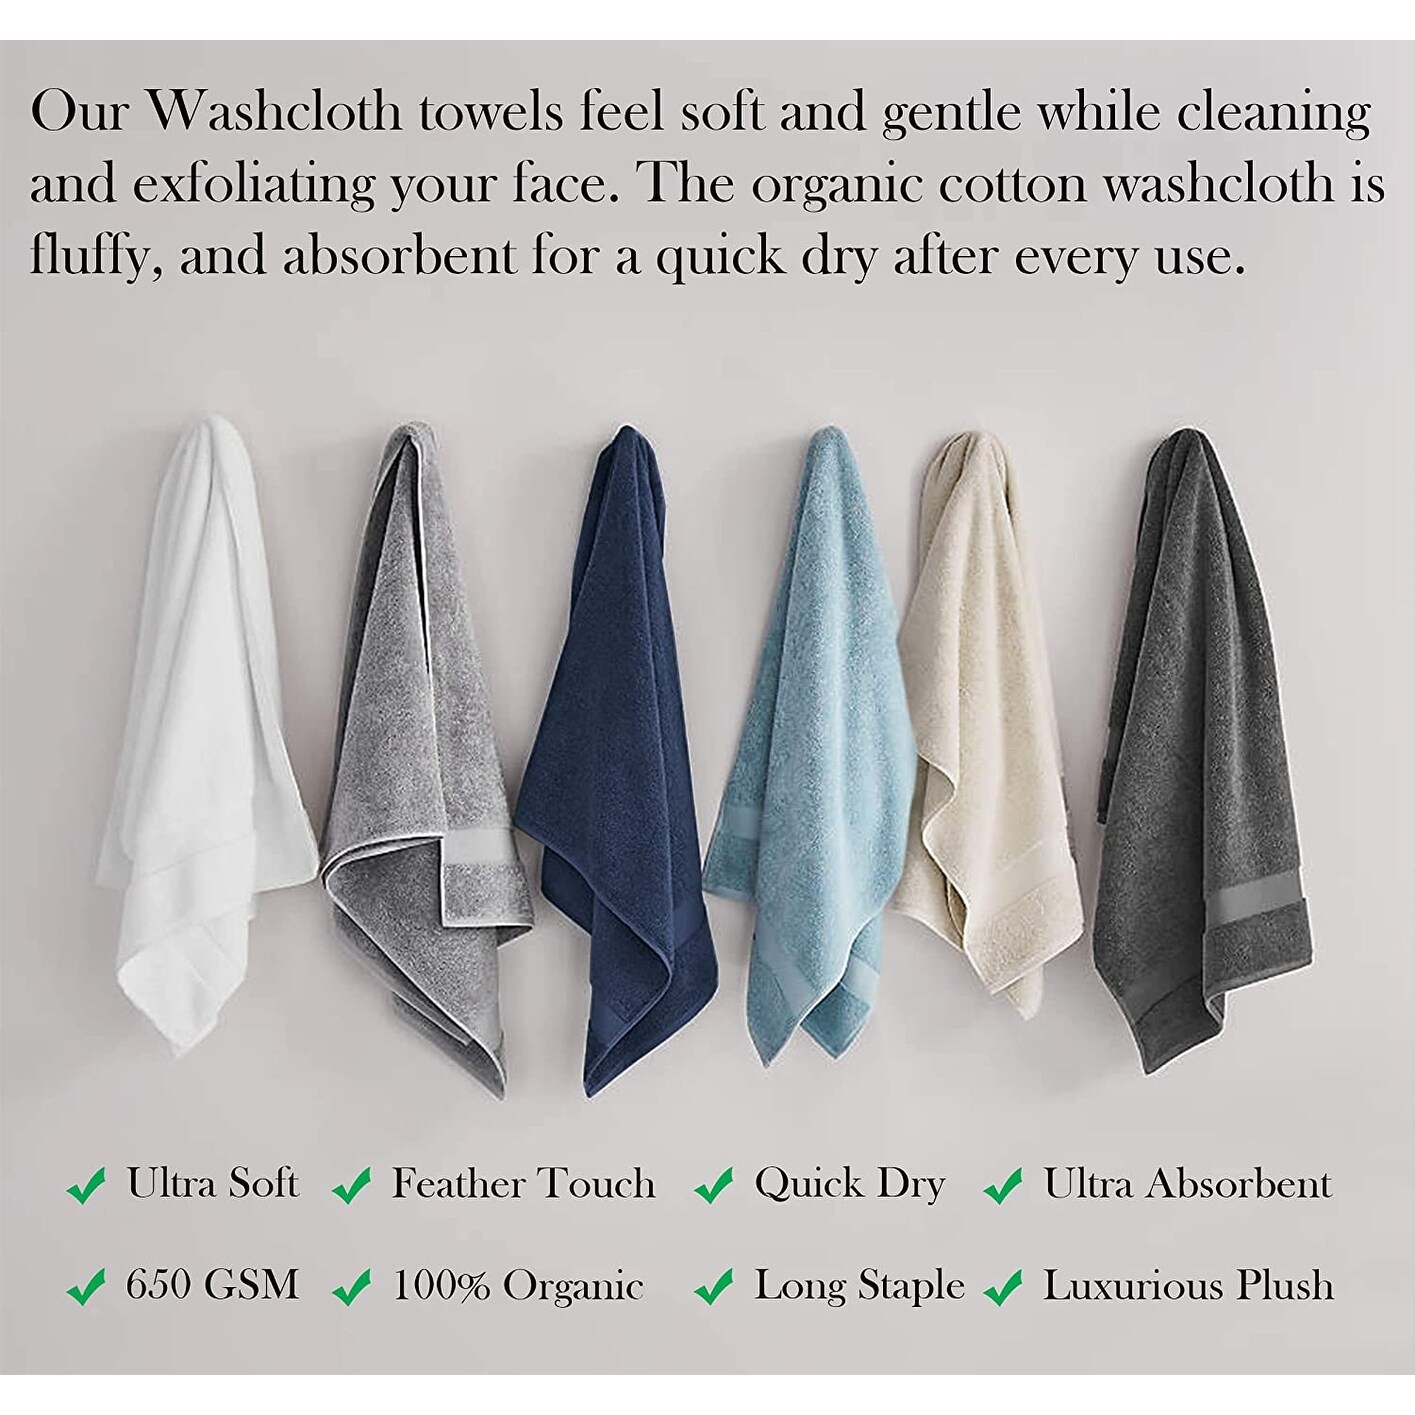 https://ak1.ostkcdn.com/images/products/is/images/direct/03c89b31fa9cfbe36d8c79b55c4de02273b81548/Delara-Organic-Cotton-Luxuriously-Plush-Washcloths-Pack-of-6-%7CGOTS-%26-OEKO-TEX-Certified-%7C650-GSM-Long-Staple-%7C-Quick-Dry-%26-Soft.jpg